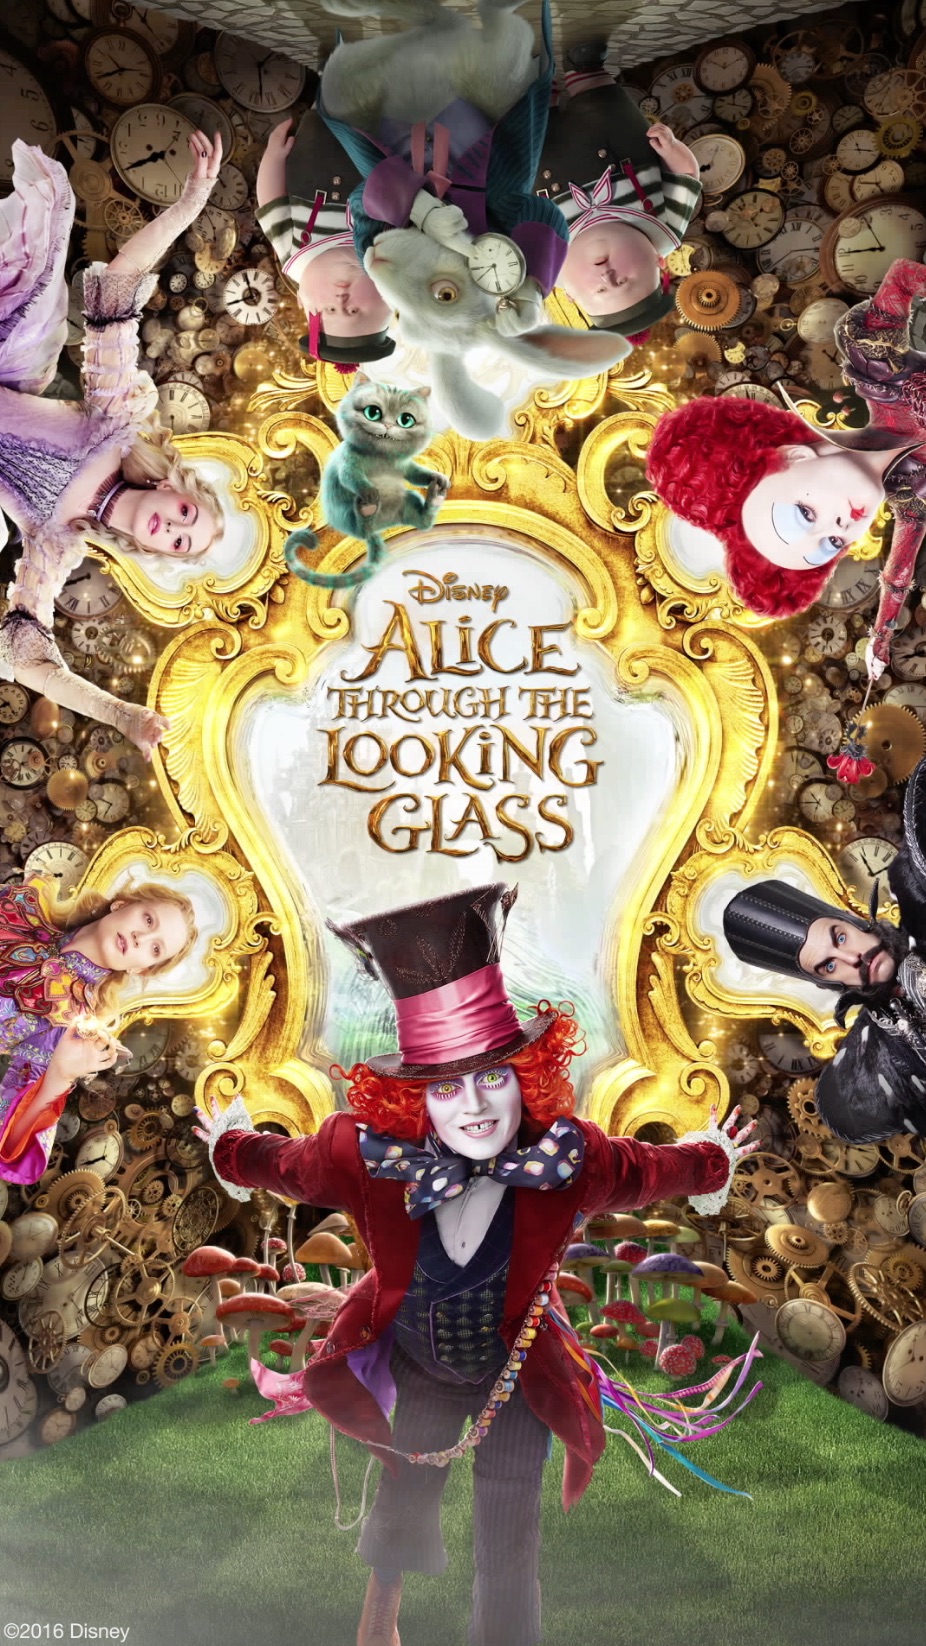 Alice-Through-the-Looking-Glass-Poster.jpg